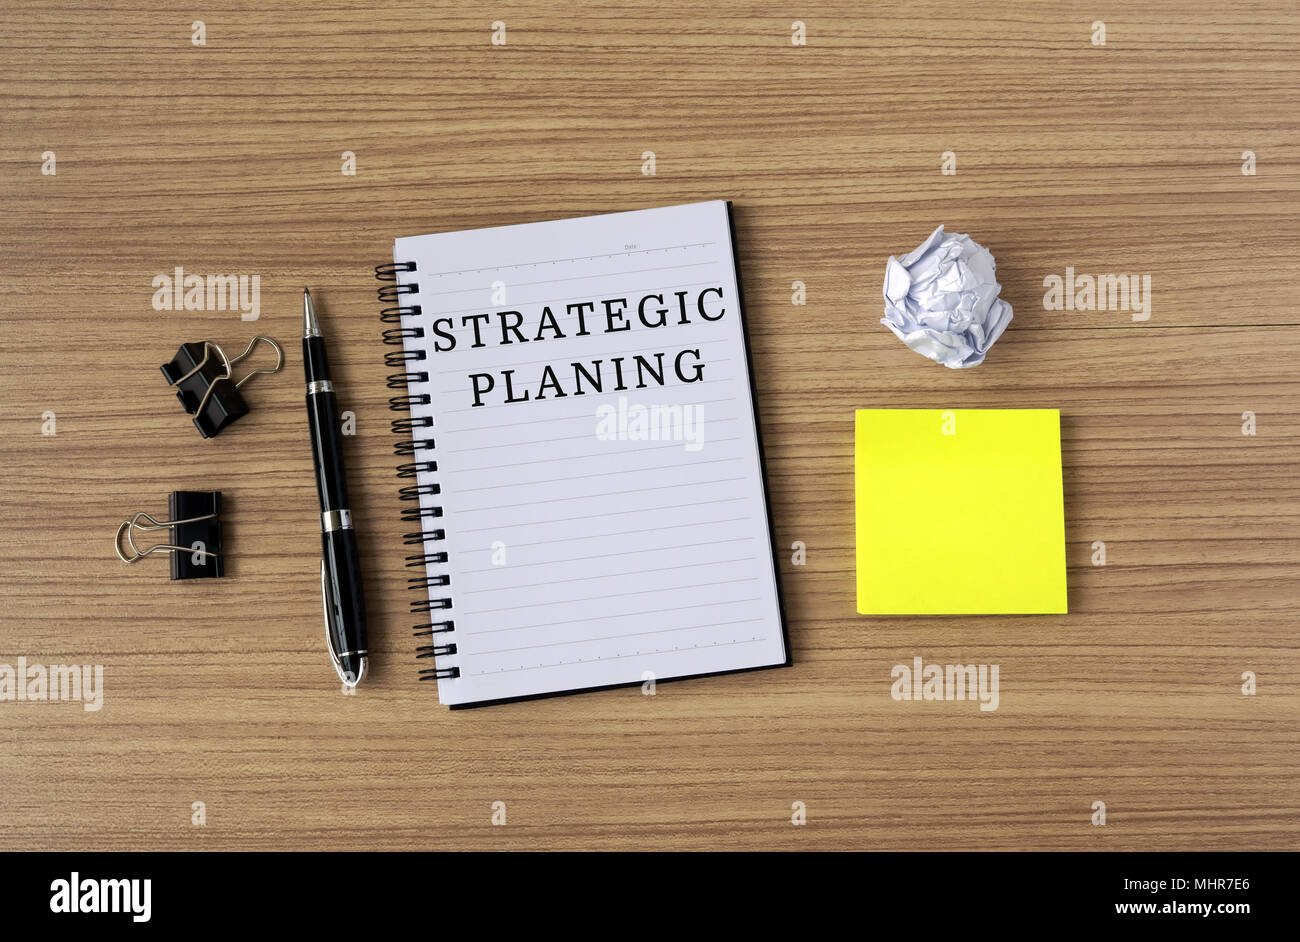 Strategic Planning text on notepad, flat lay office desk. Stock Photo